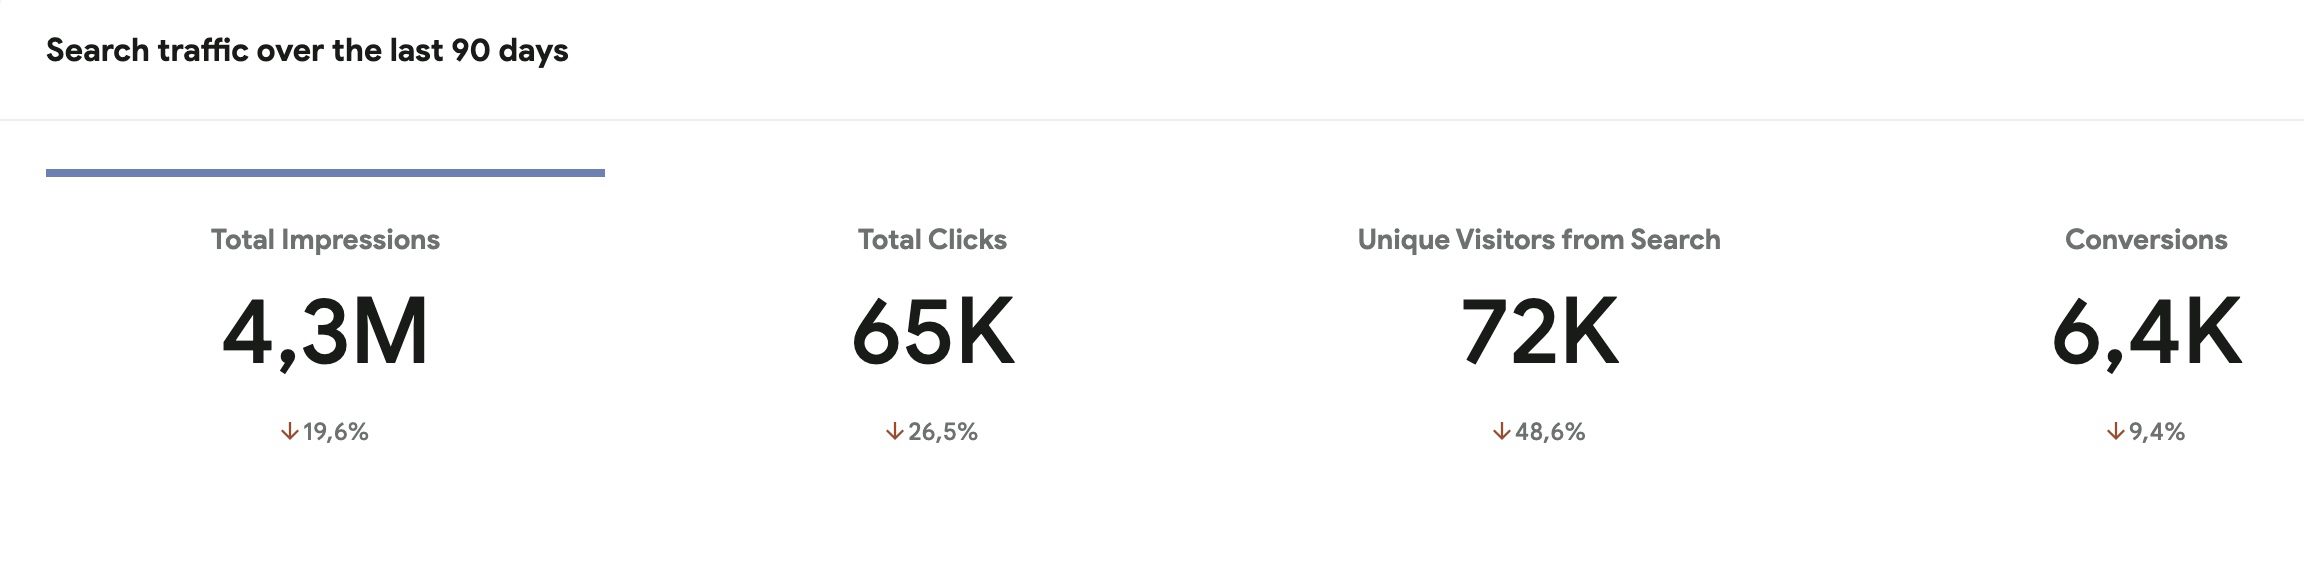 Search traffic stats for the last 90 days showing declines in total impressions, clicks, unique visitors, and conversions